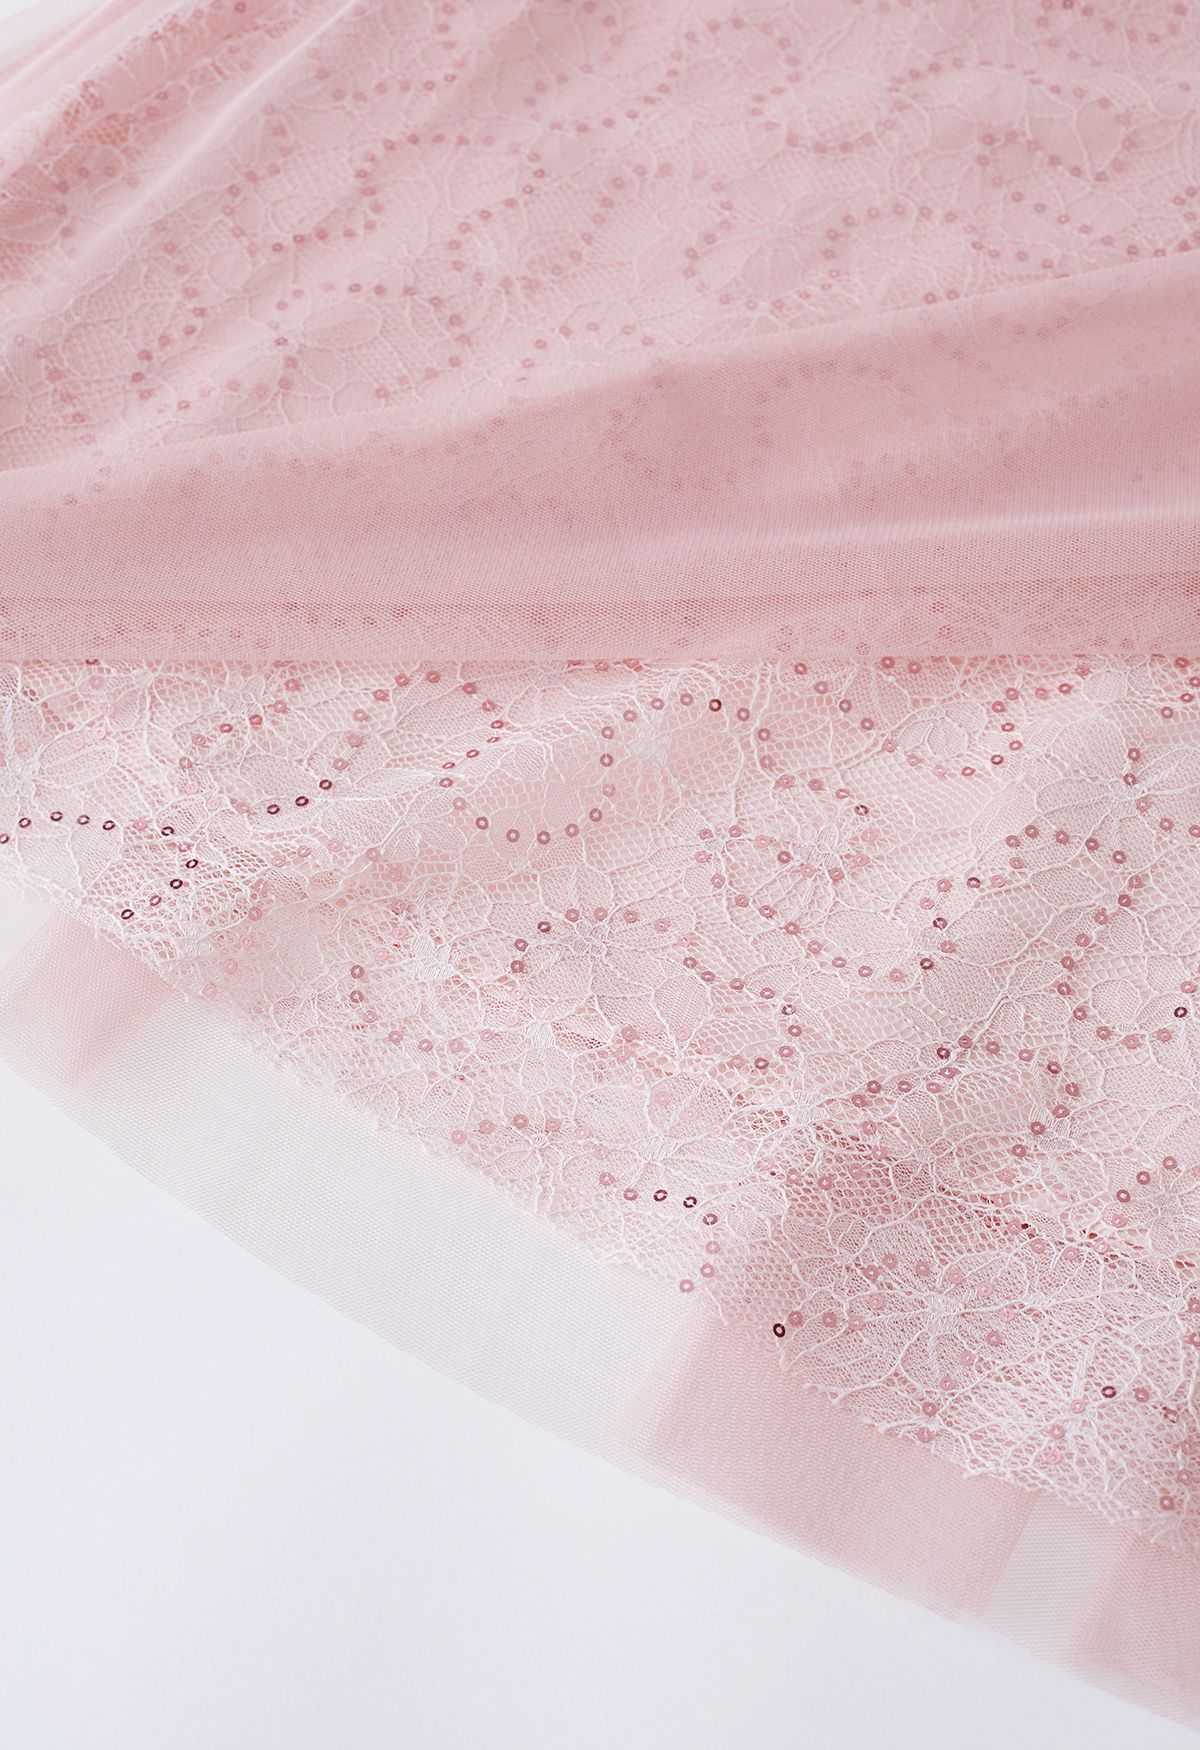 Sequined Floral Lace Mesh Tulle Skirt in Pink